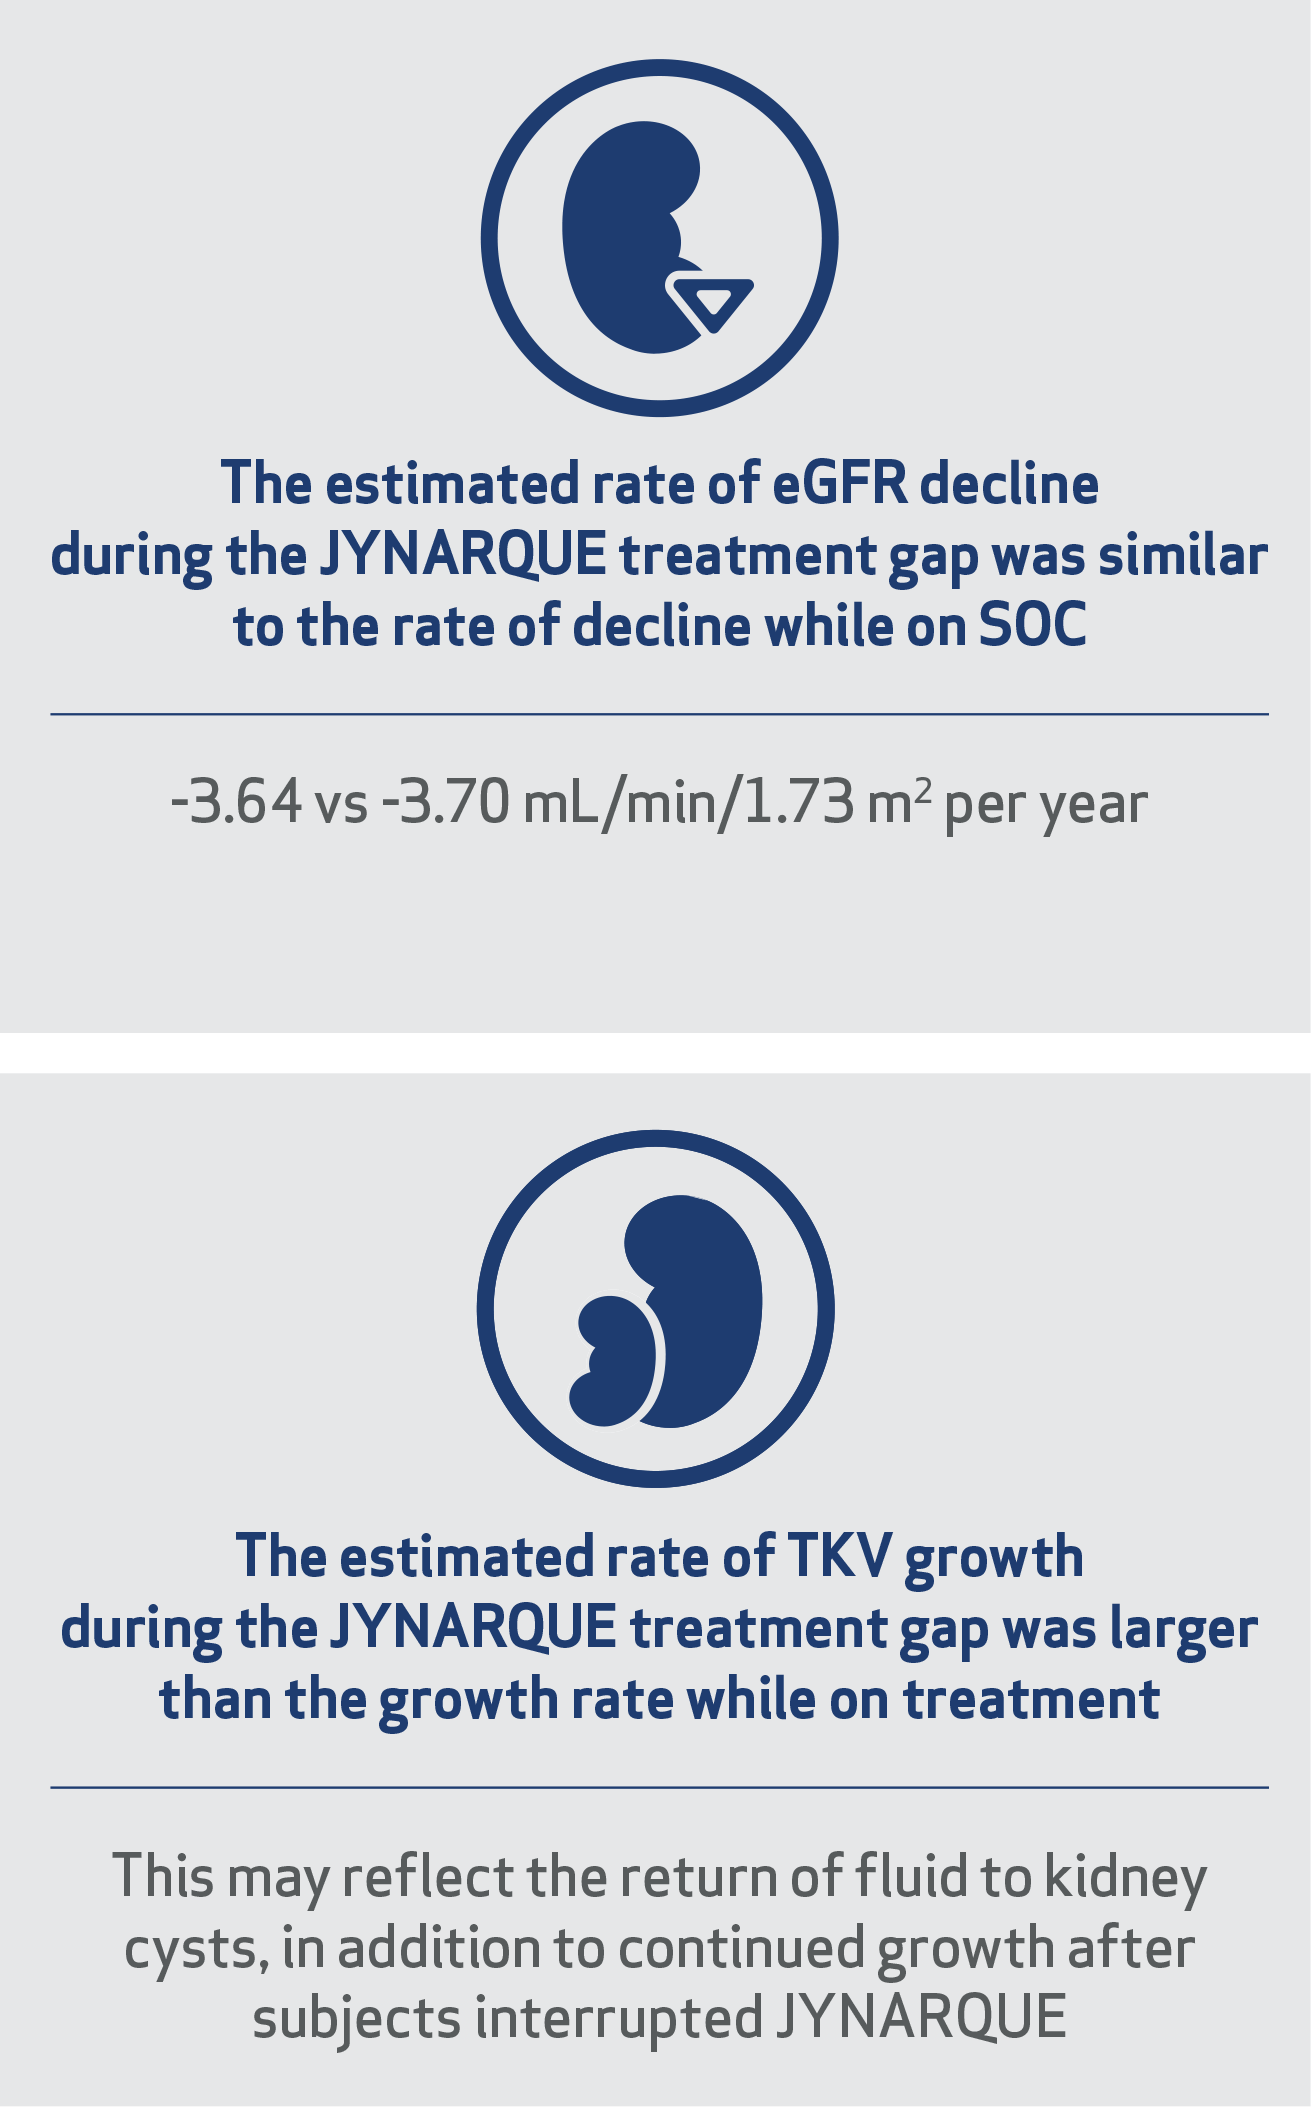 Estimated rate of eGFR decline and Estimated rate of TKV growth